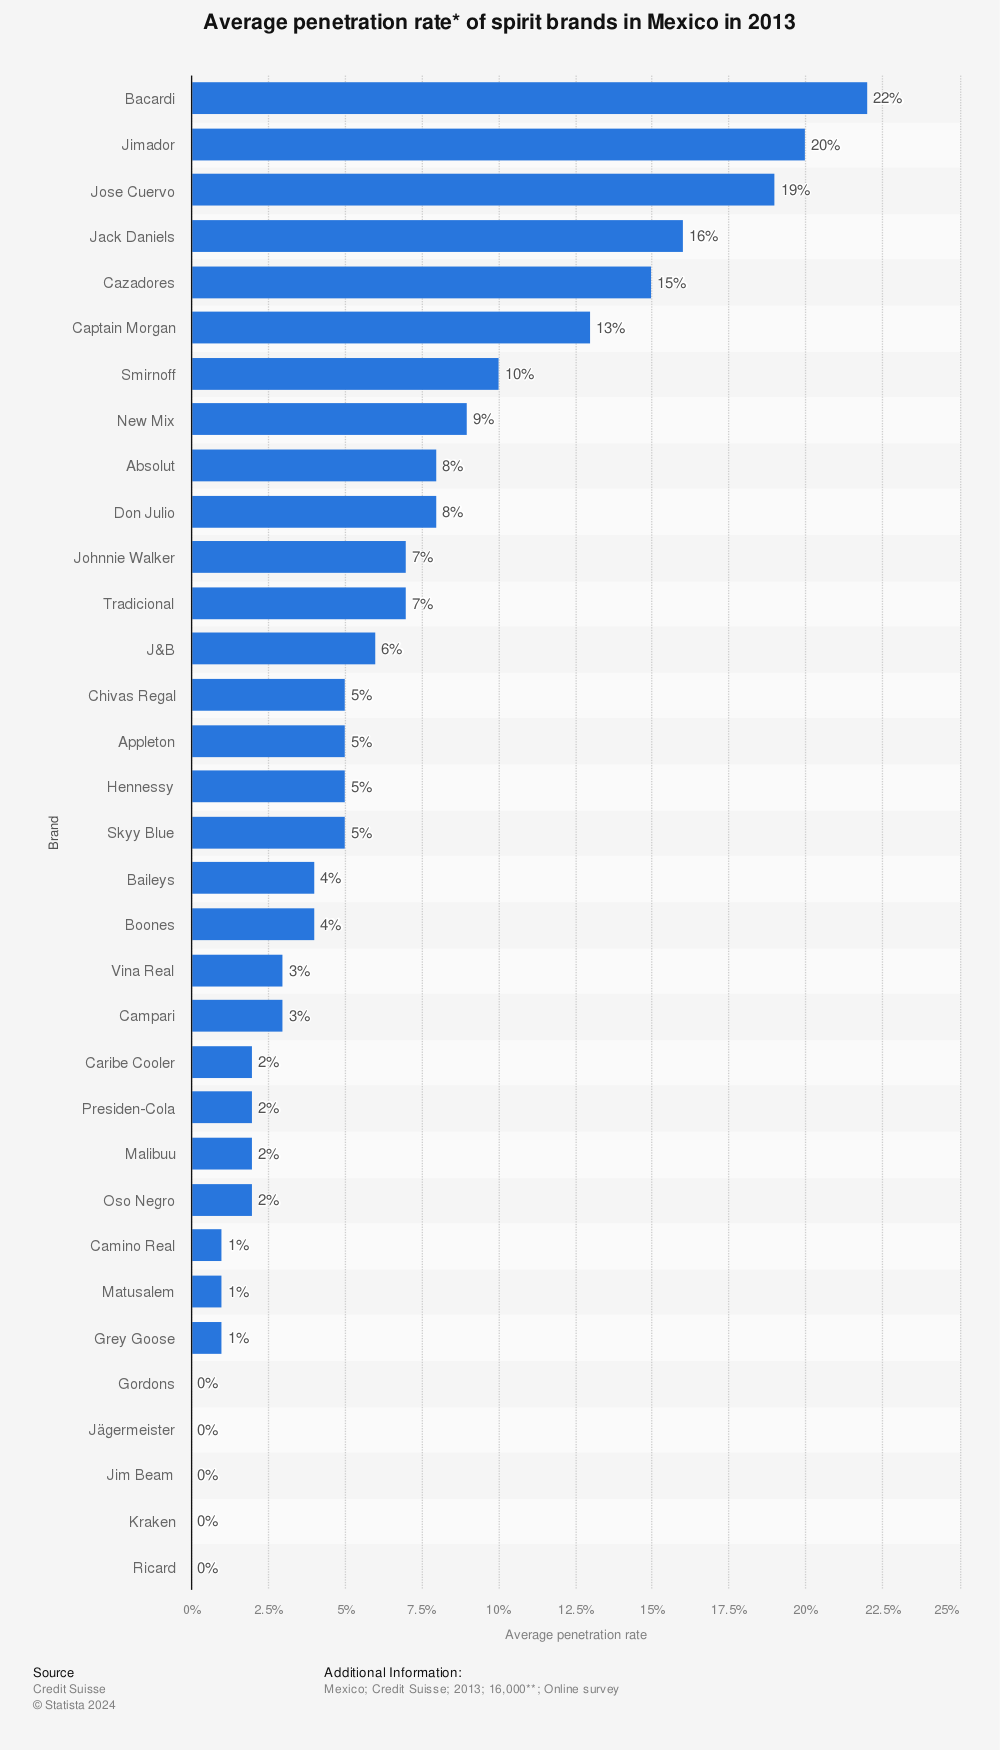 Statistic: Average penetration rate* of spirit brands in Mexico in 2013 | Statista